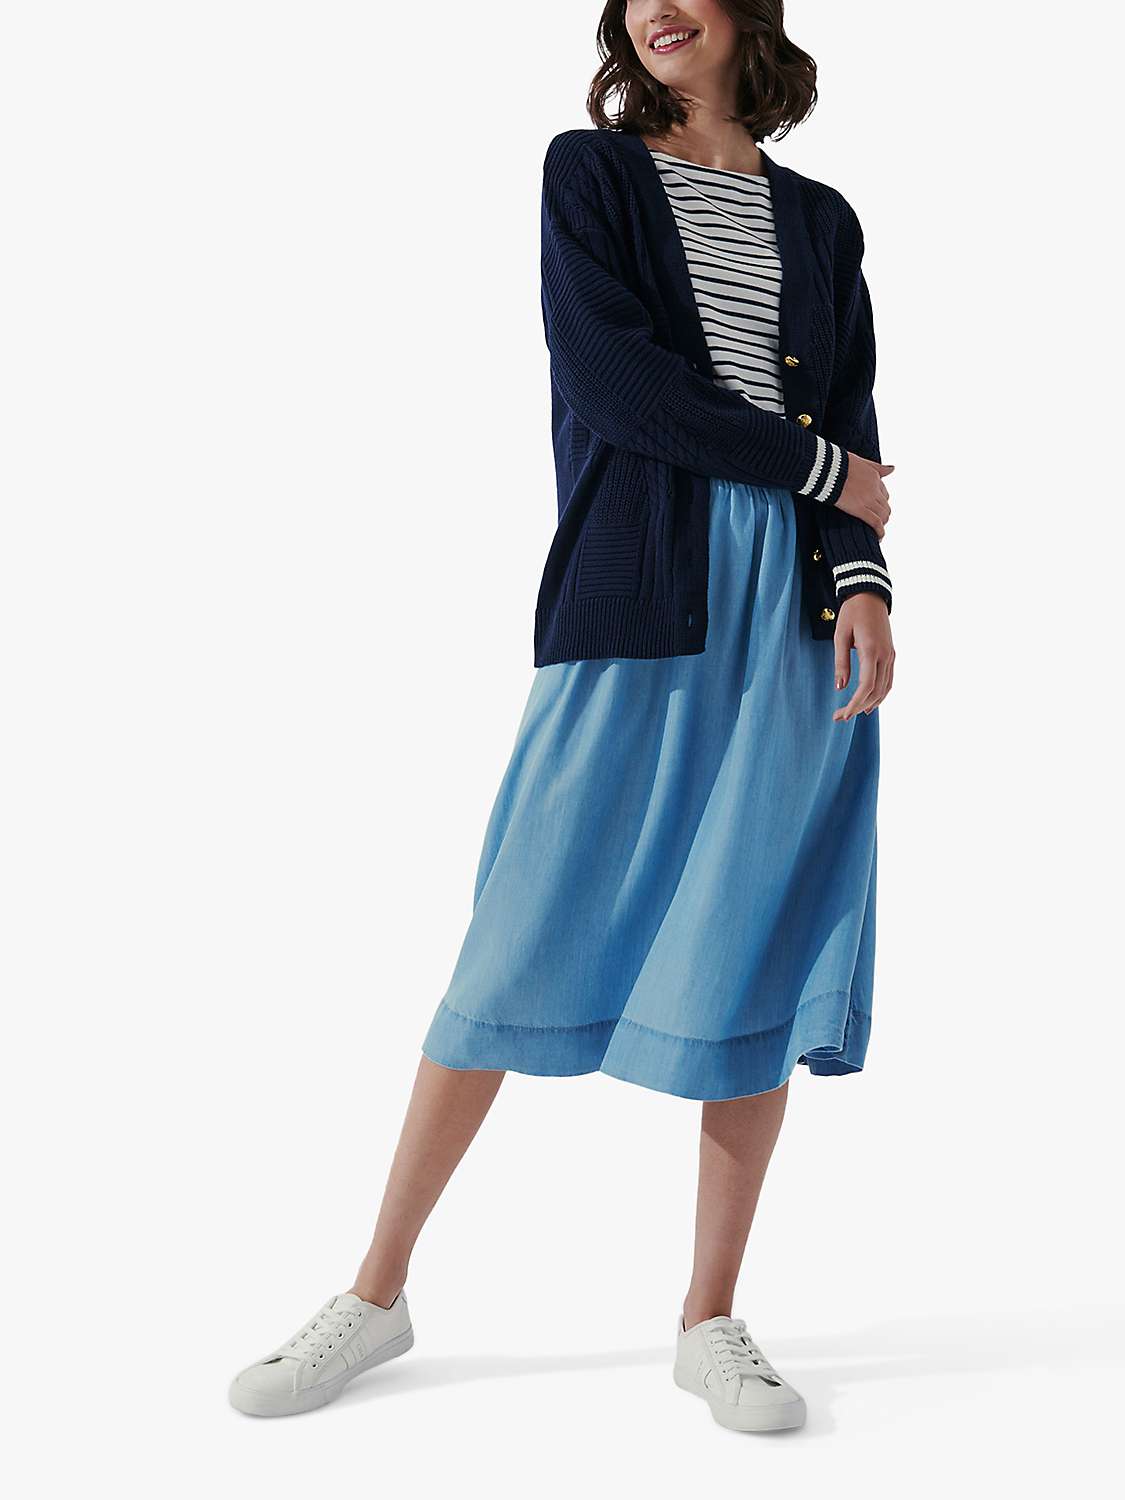 Buy Crew Clothing Textured Striped Cuff Cardigan Online at johnlewis.com